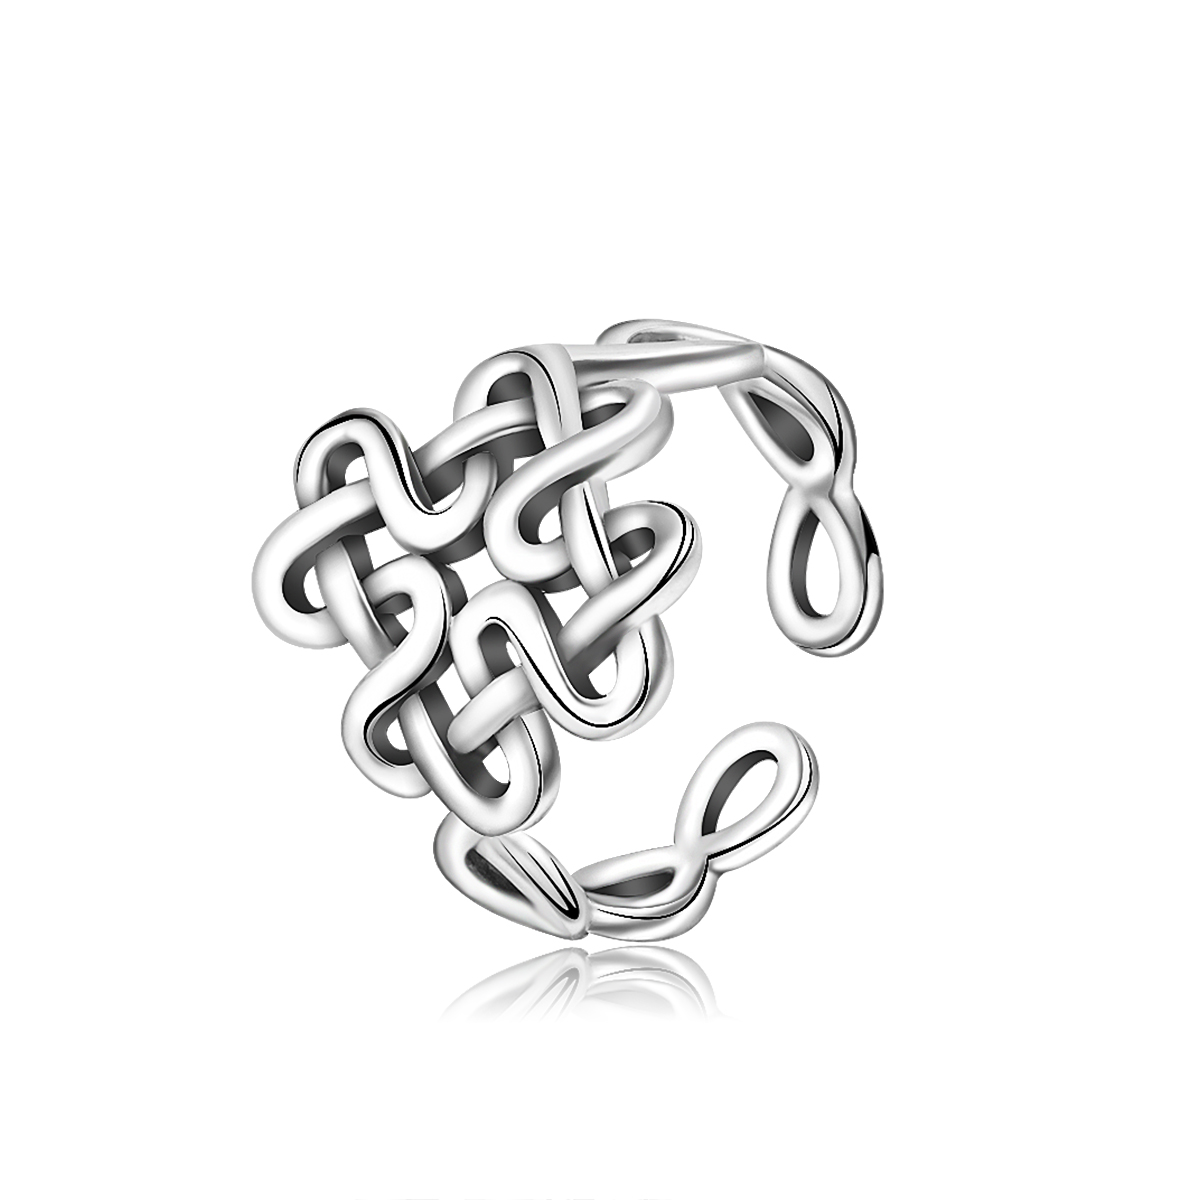 Merryshine Jewelry Vintage Oxidized 925 Sterling Silver Good Celtic Knot Ring